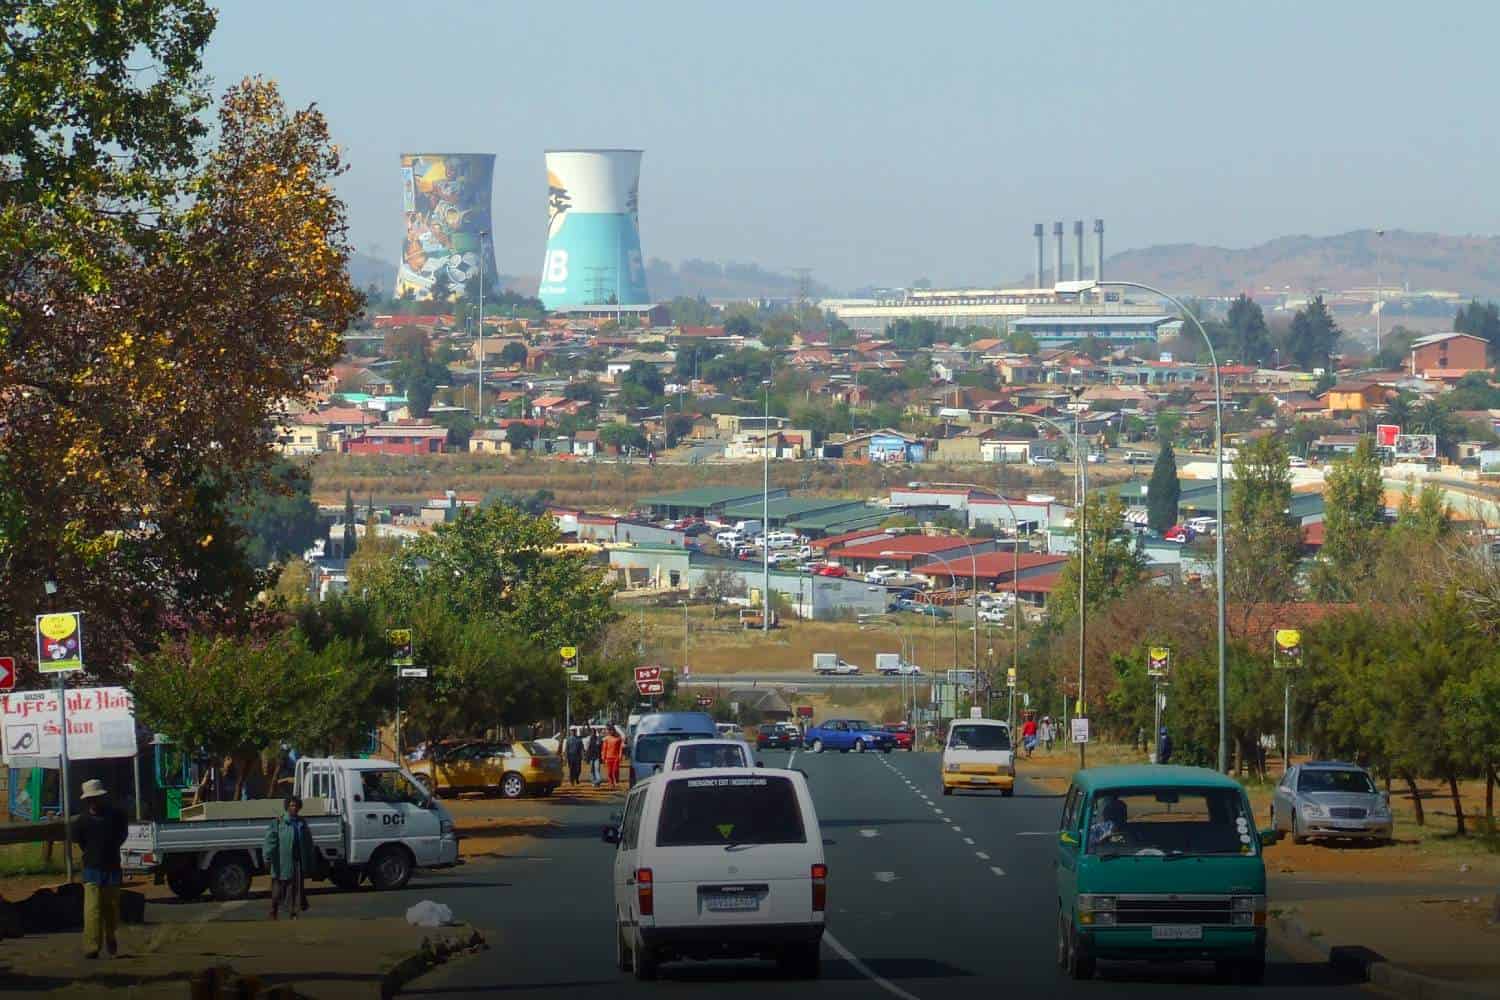 gauteng travel guide when to visit places to visit safety suggestions soweto